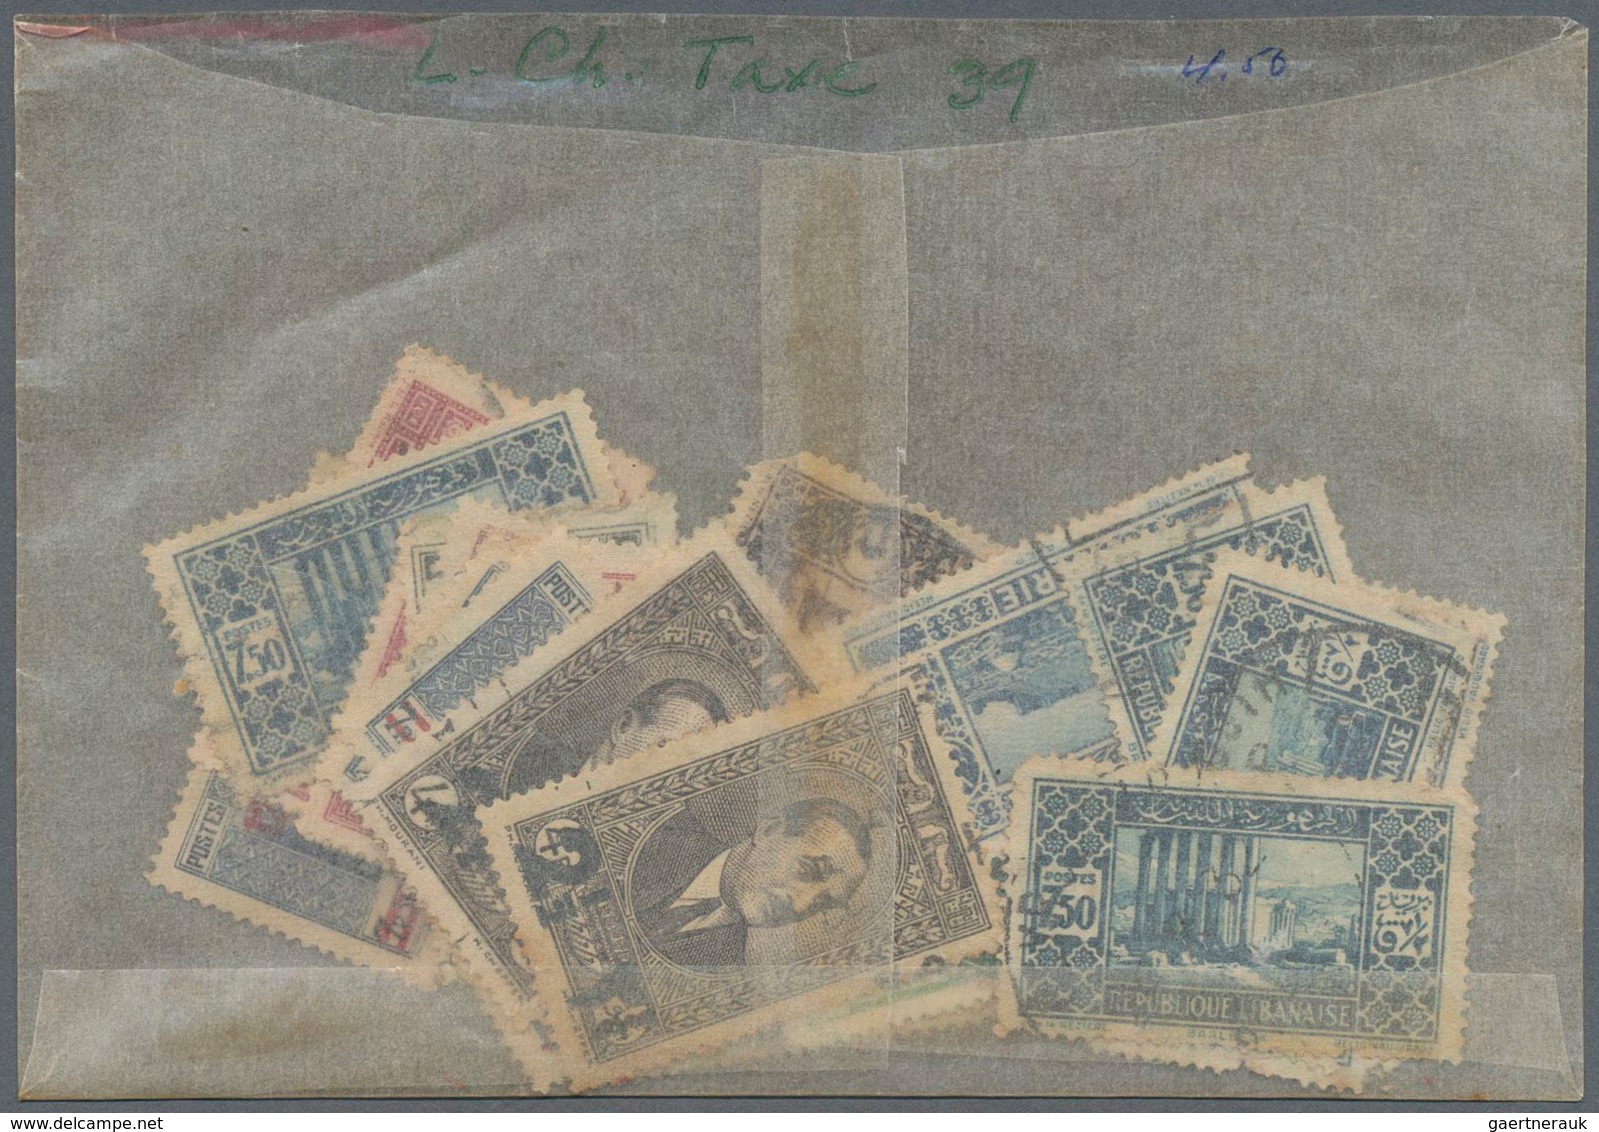 Libanon: 1926/1970 (ca.), mainly used stock in glasines and hundreds of airmails letters. Interestin